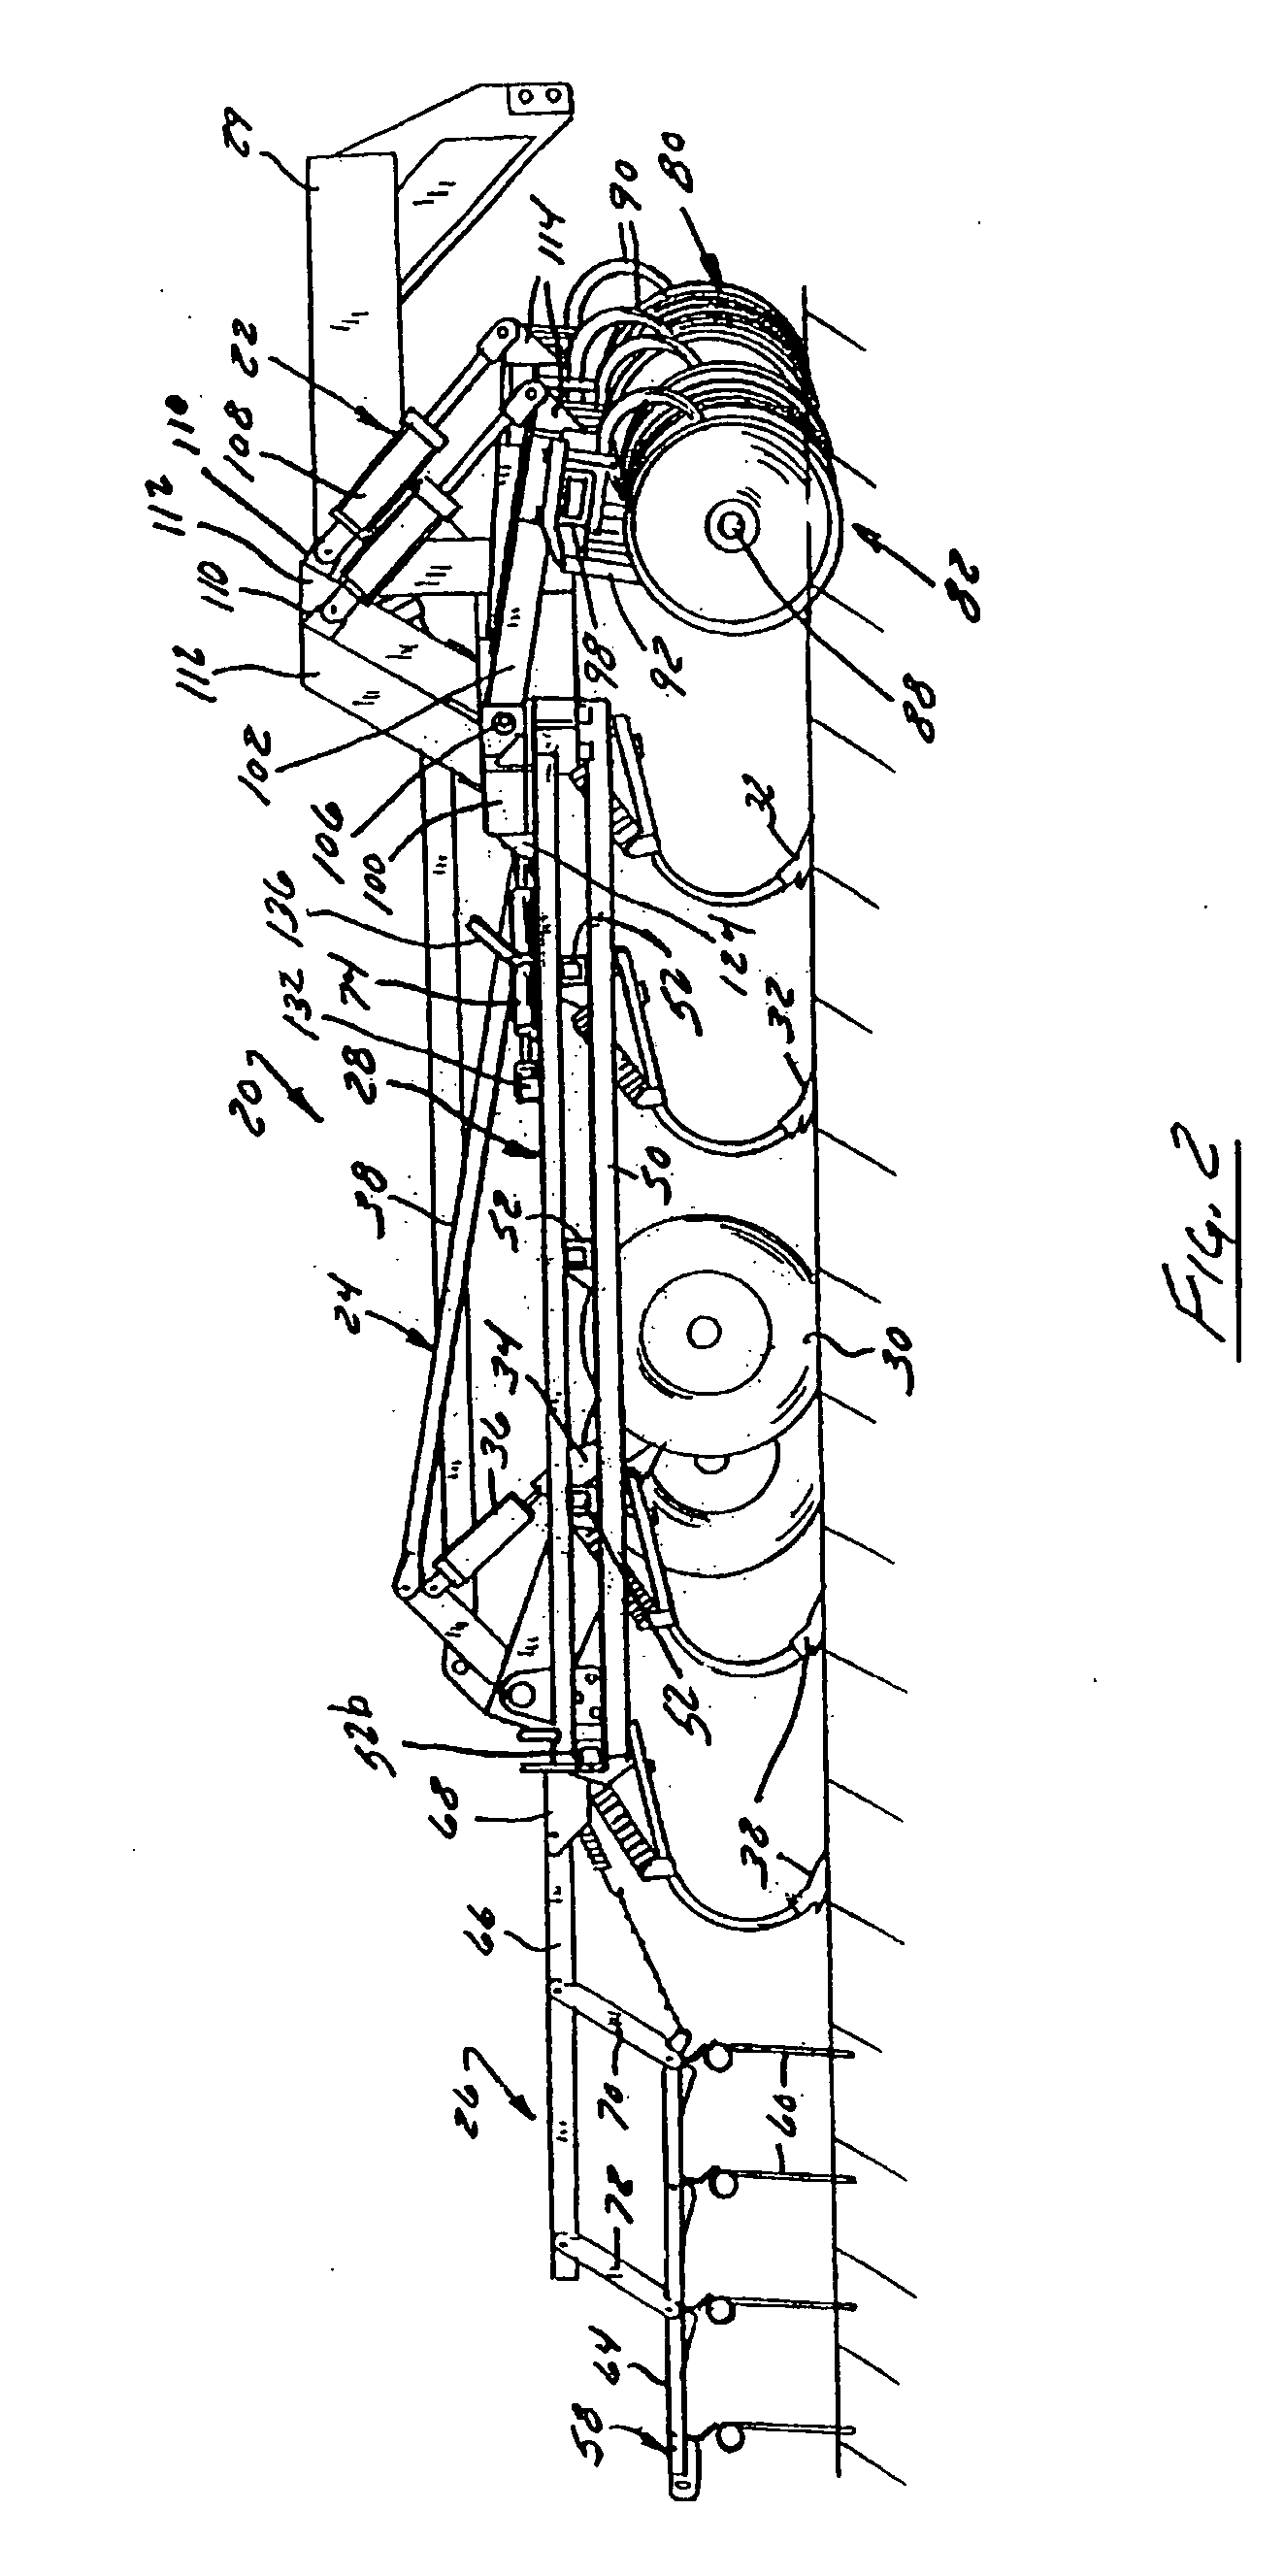 Seedbed preparation implement having rotary disc with adjustable gang angle